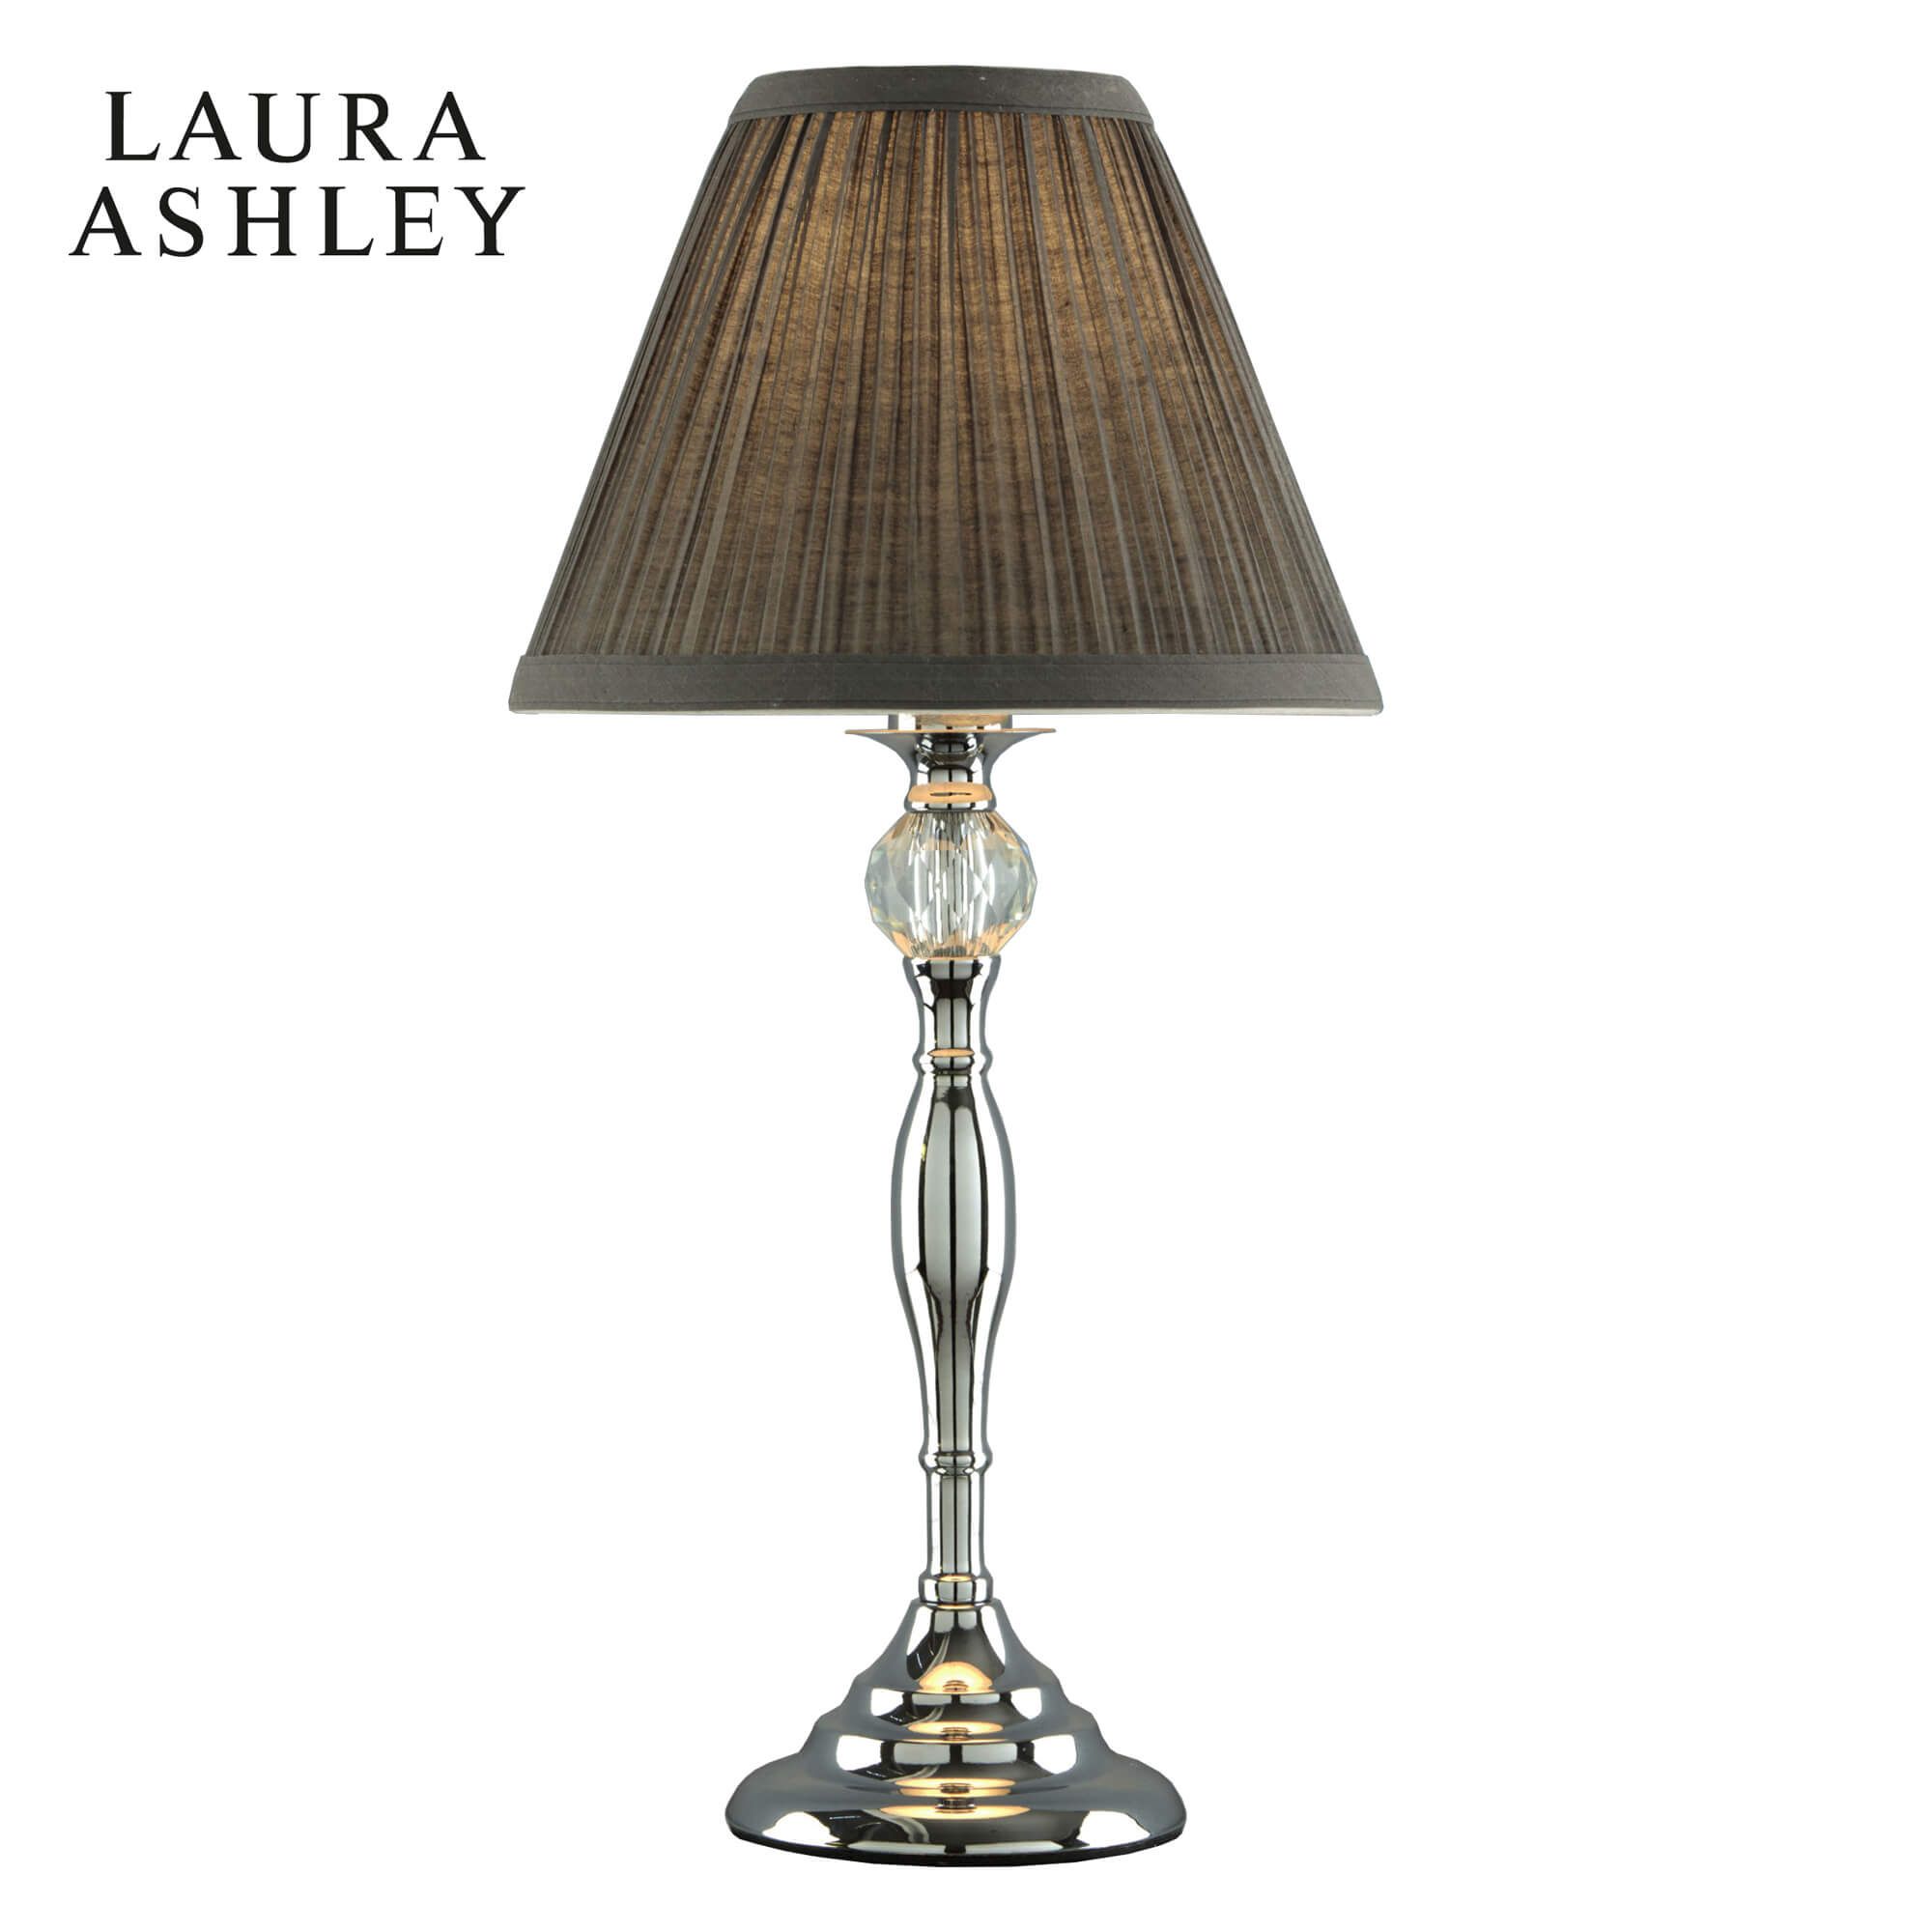 laura ashley table lamps